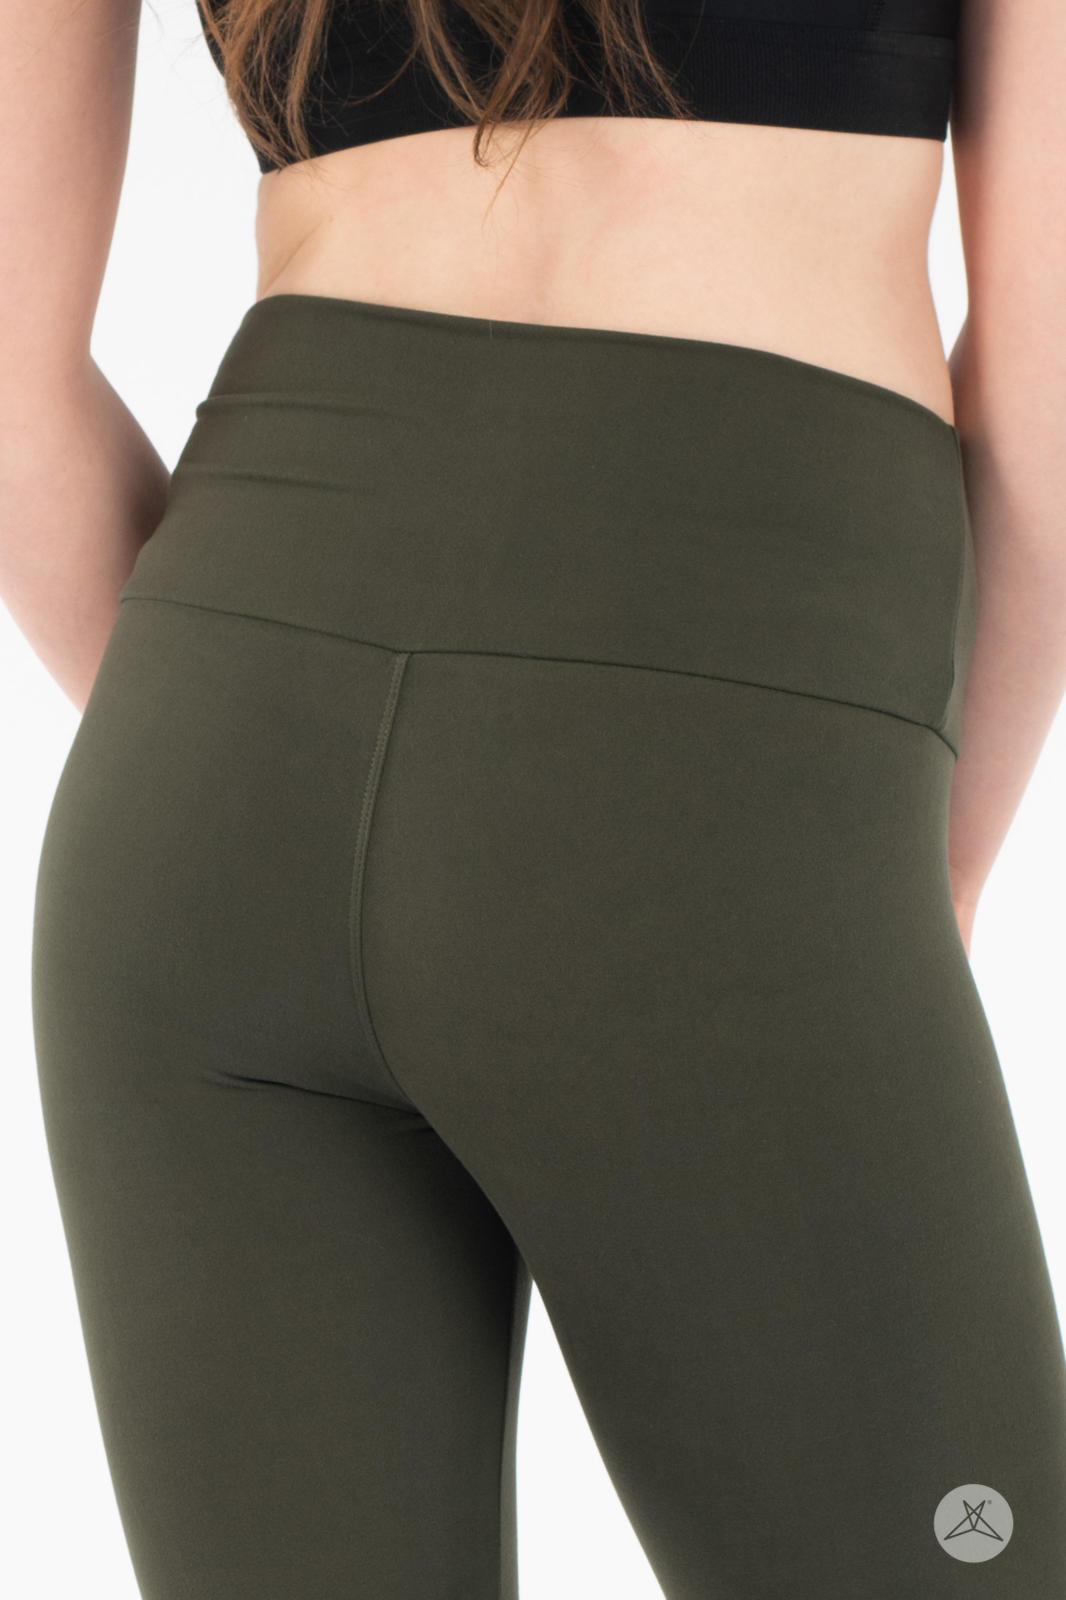 Dark Olive Green - solid color Leggings by Make it Colorful